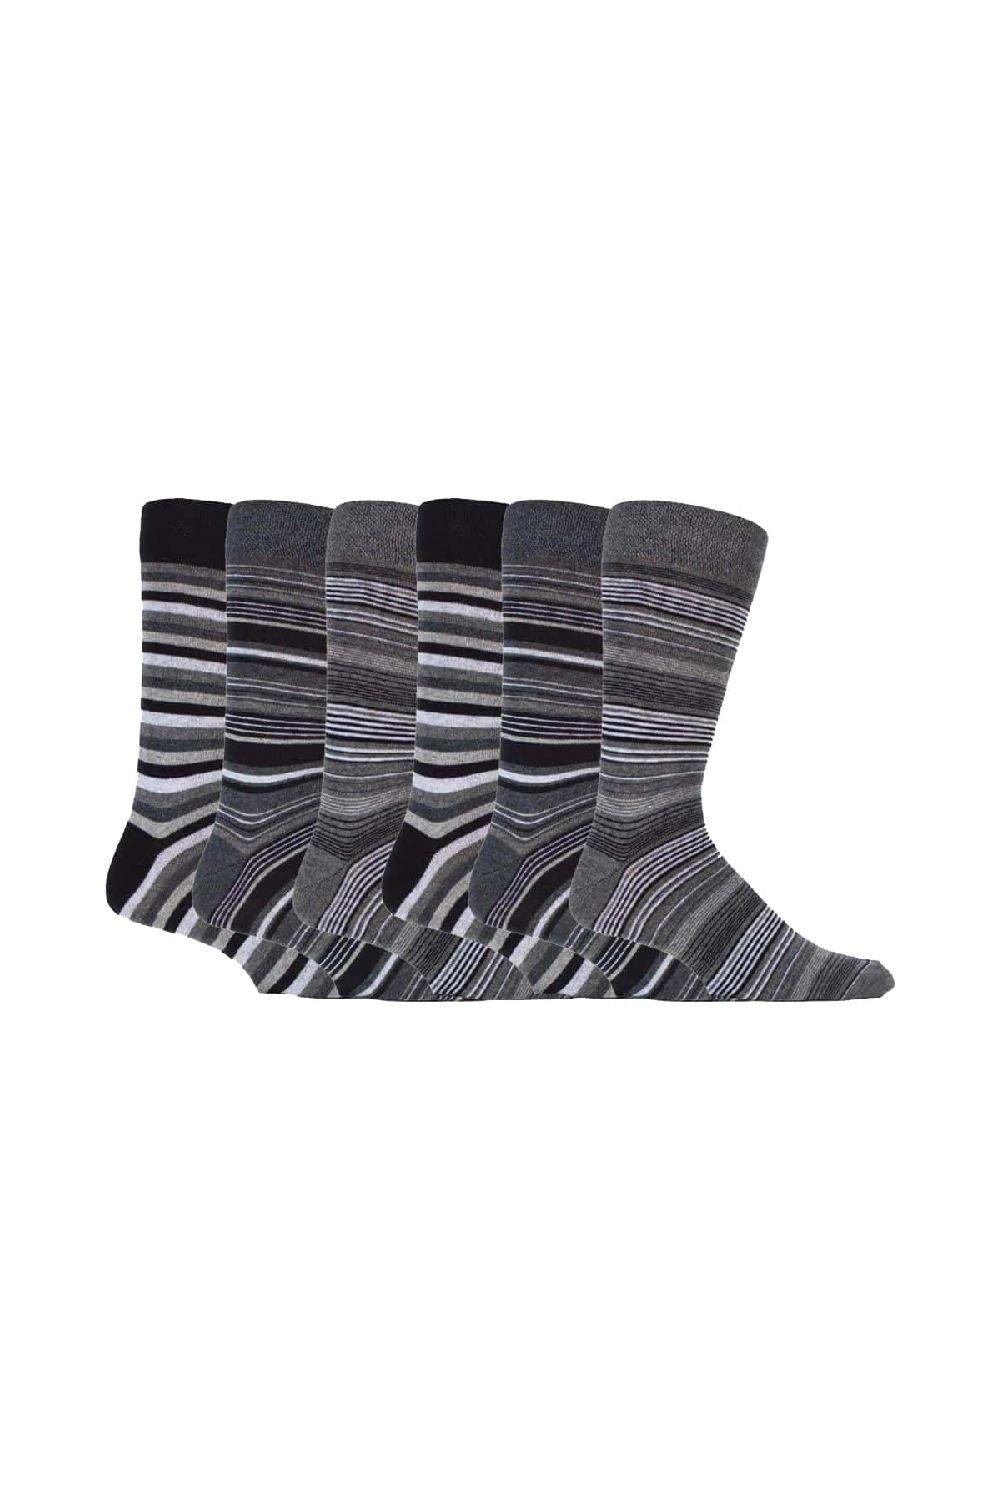 6 Pack Colourful Striped Patterned Cotton Dress Socks